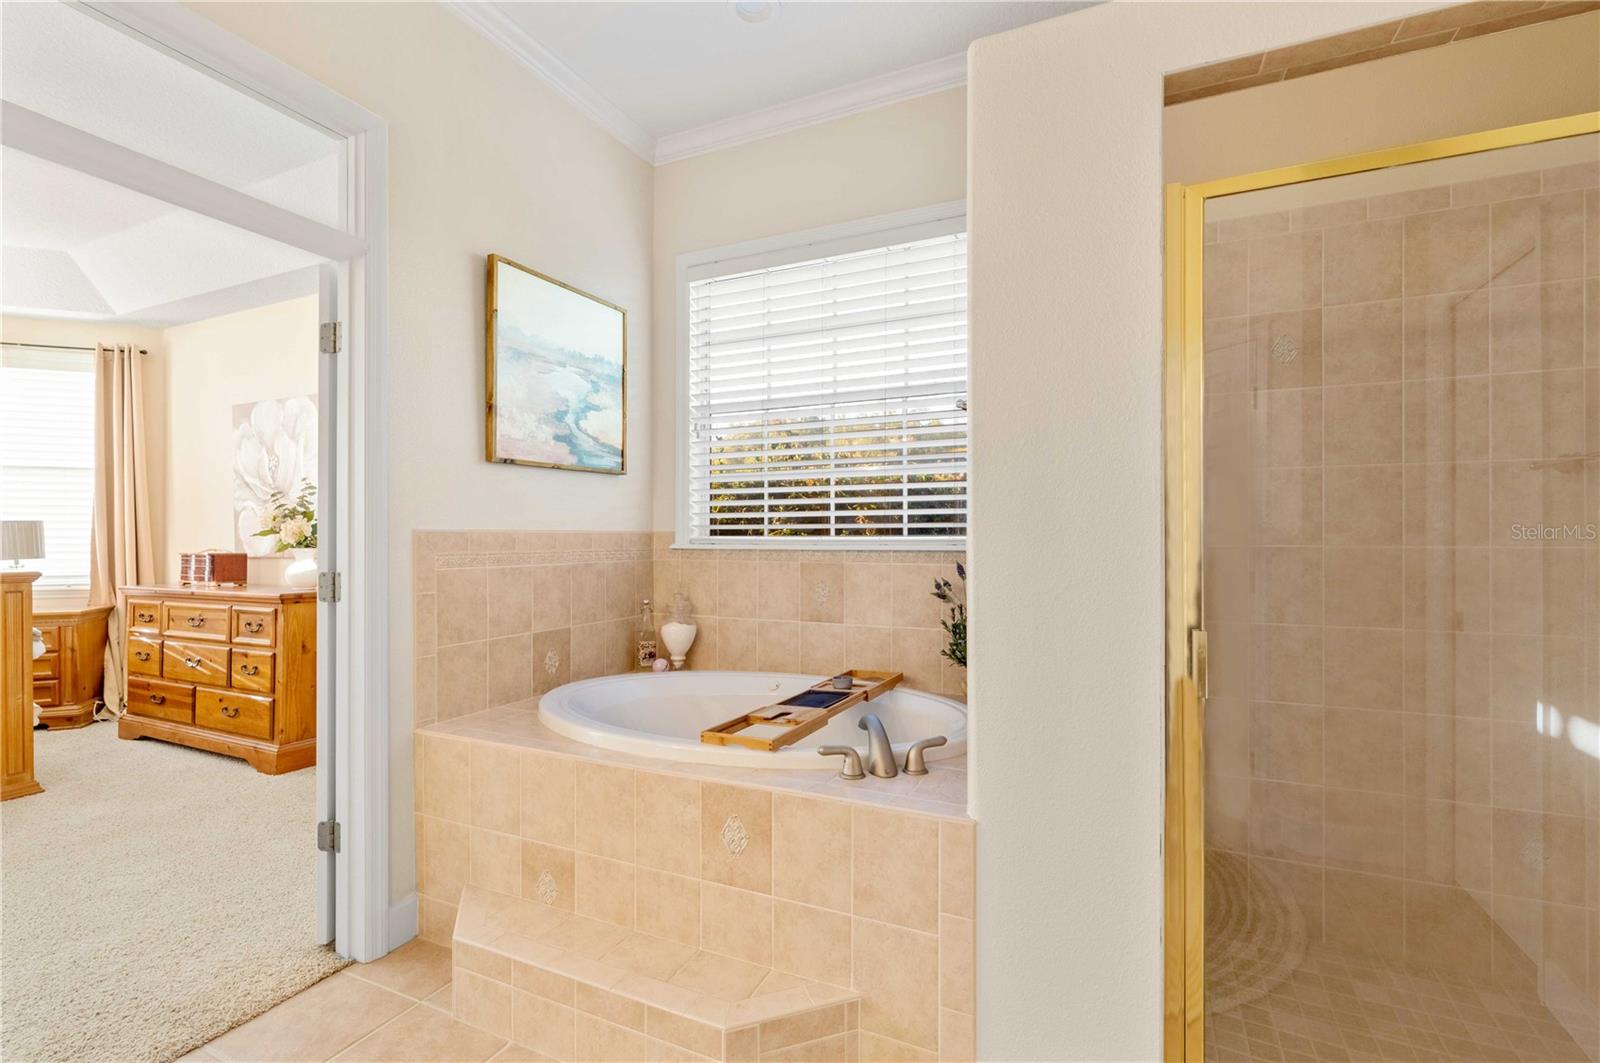 Primary Bath with Garden Tub and Large Walk in Shower